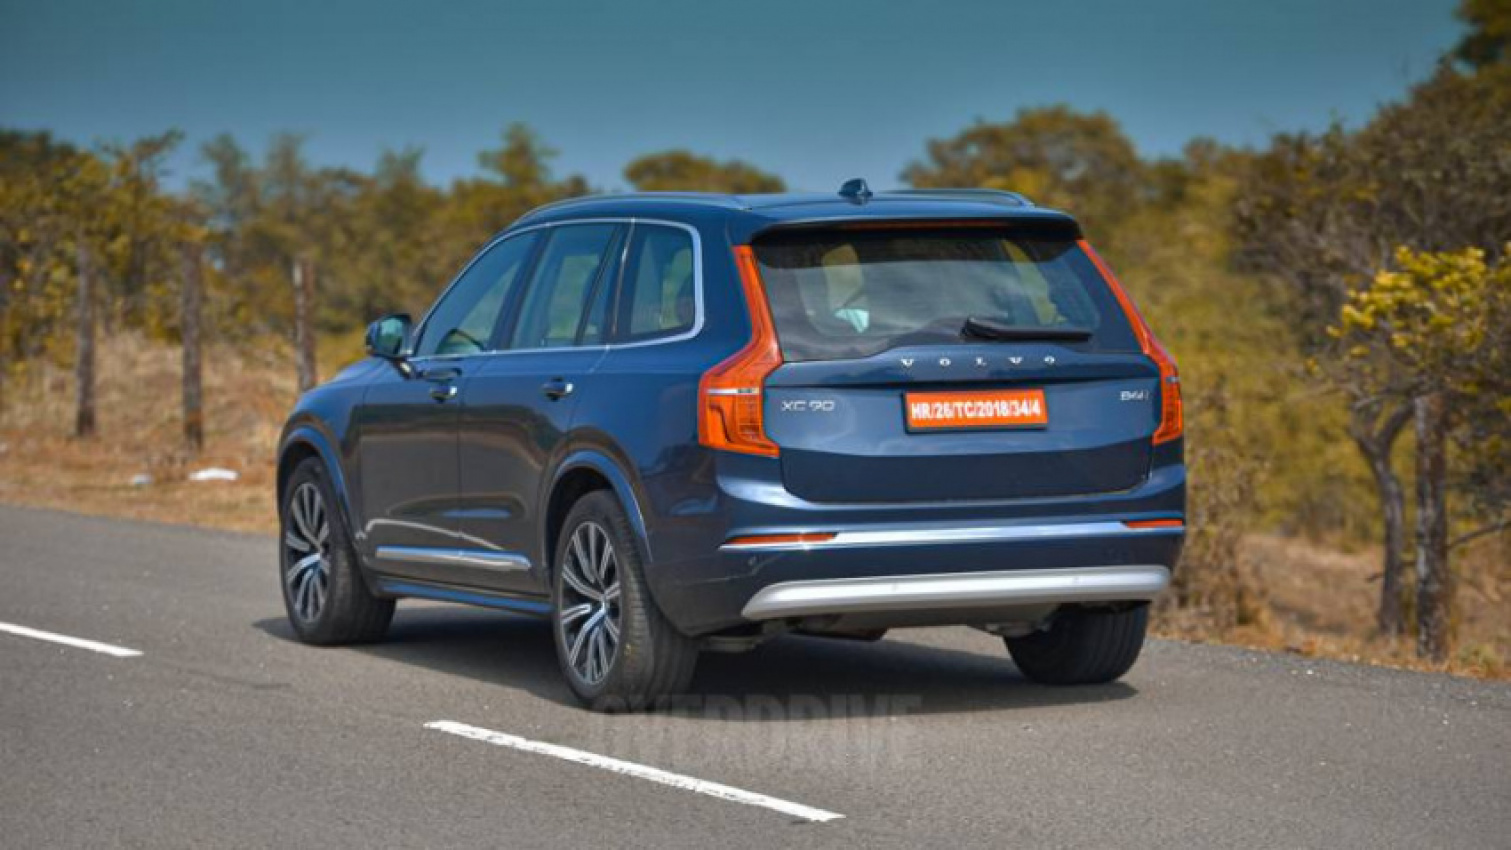 autos, cars, reviews, volvo, new cars 2022, new suvs 2022, overdrive, vnex, volvo car, volvo xc90, volvo xc90 2022, volvo xc90 7 seater, volvo xc90 7 seater interior, volvo xc90 7 seater price, volvo xc90 b6 petrol review india, volvo xc90 facelift 2022, volvo xc90 features, volvo xc90 inscription petrol, volvo xc90 interiors, volvo xc90 mileage, volvo xc90 petrol 2022, volvo xc90 petrol car mileage, volvo xc90 petrol images, volvo xc90 petrol india, volvo xc90 petrol interiors, volvo xc90 petrol price 2022, volvo xc90 petrol review 2022, volvo xc90 petrol review india 2022, volvo xc90 petrol specifications, volvo xc90 review india 2022, volvo xc90 road test india 2022, volvo xc90 test drive india 2022, xc90 petrol mild hybrid price, xc90 petrol mild hybrid review, xc90 price india, 2022 volvo xc90 b6 petrol road test review